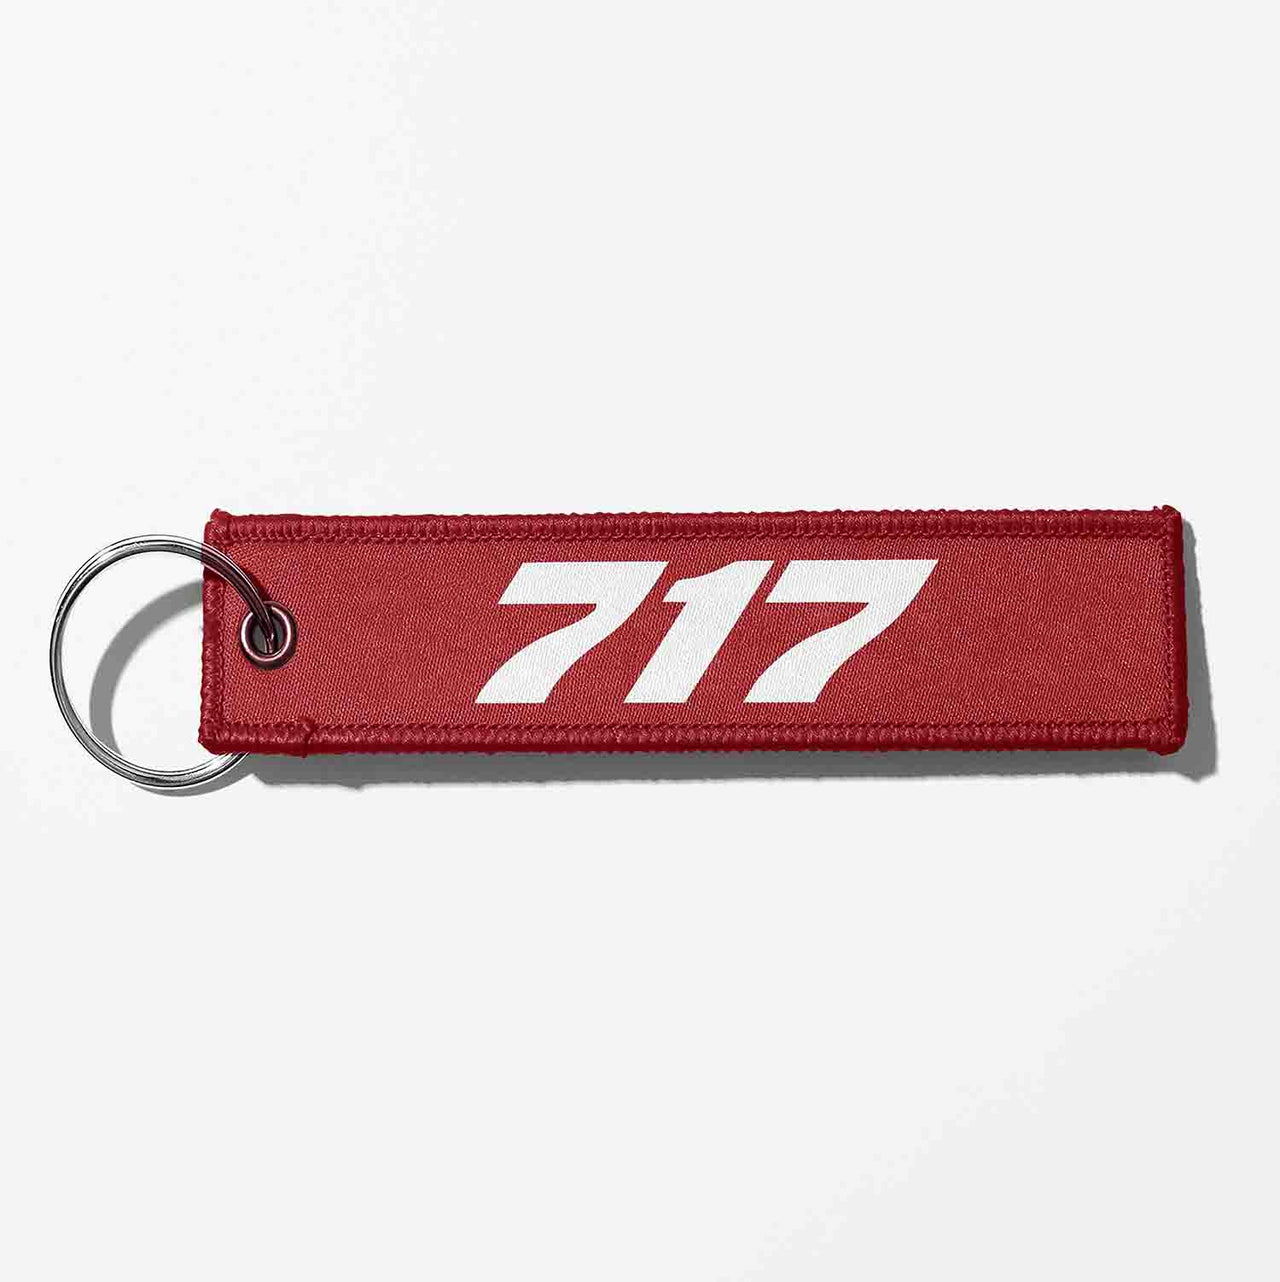 Boeing 717 Flat Text Designed Key Chains